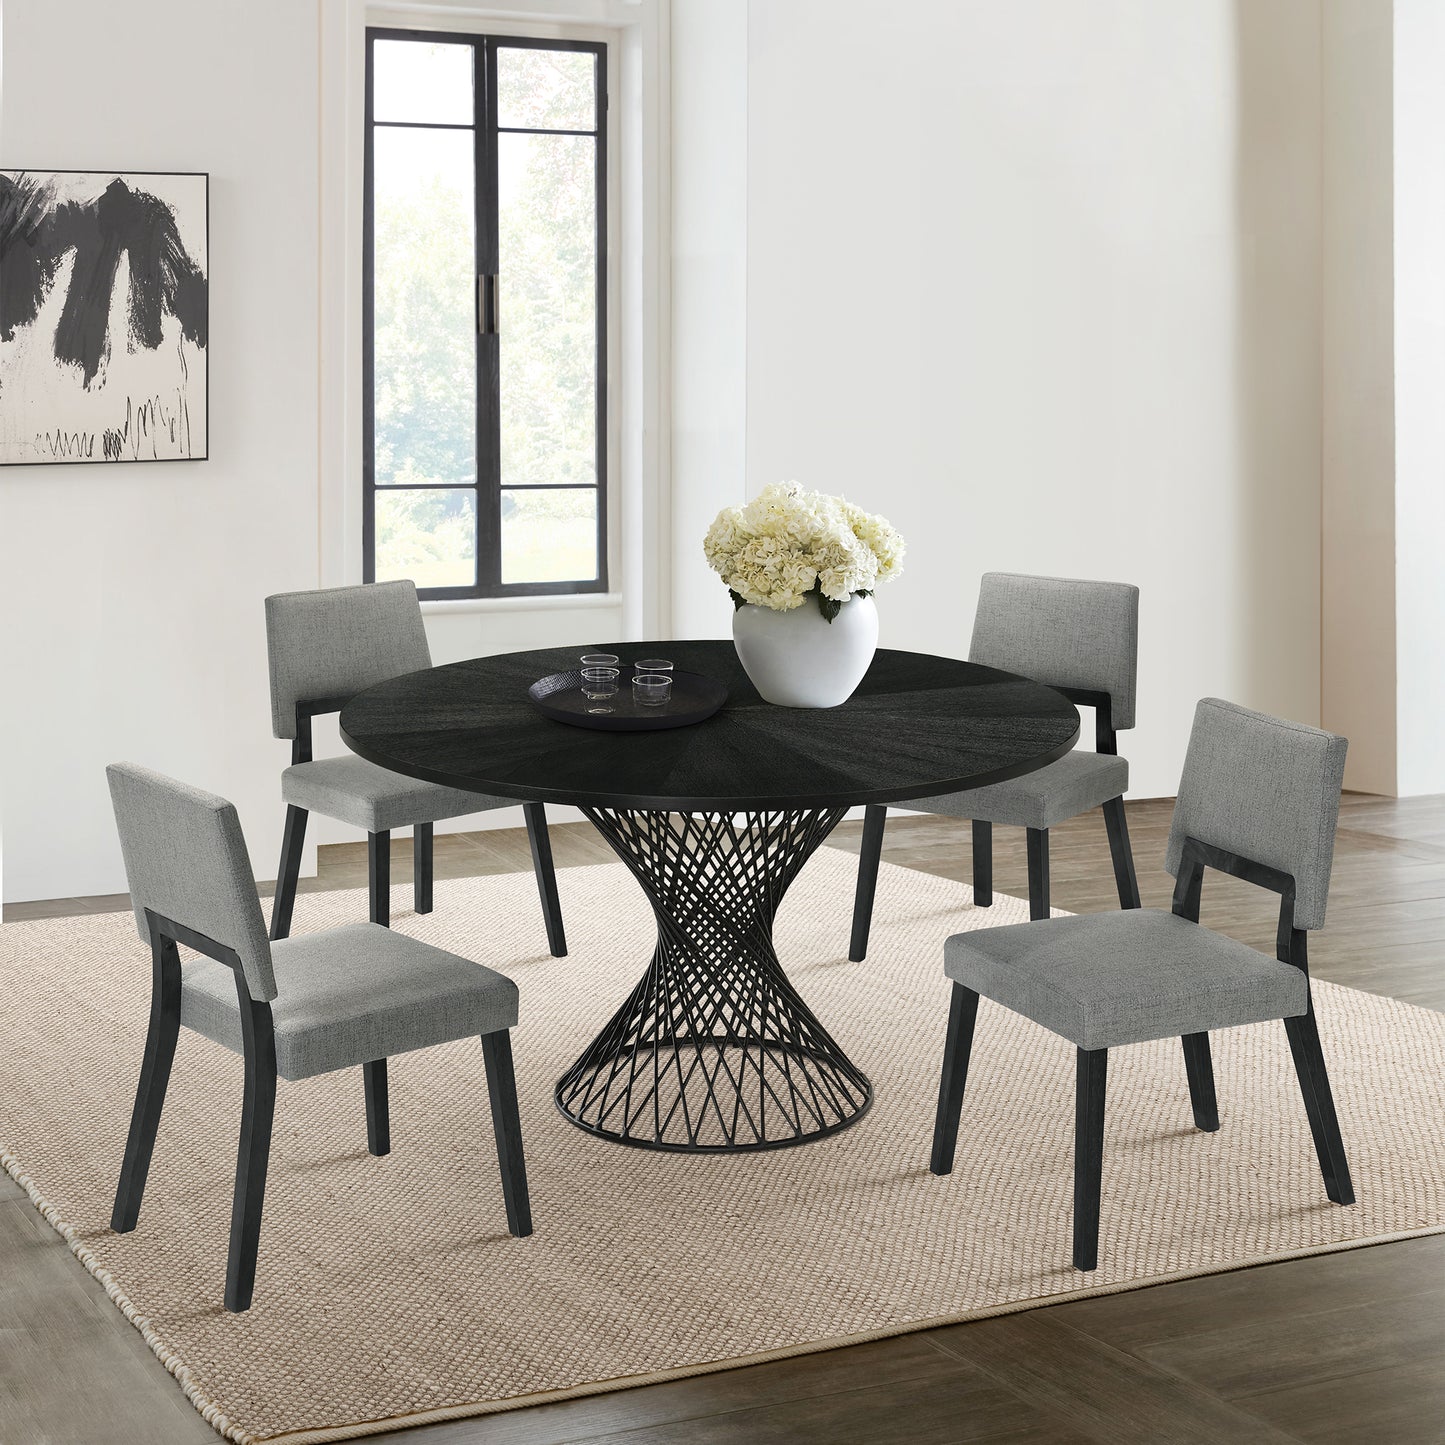 Cirque Channell 5 Piece Black Wood Dining Table Set with Charcoal Fabric